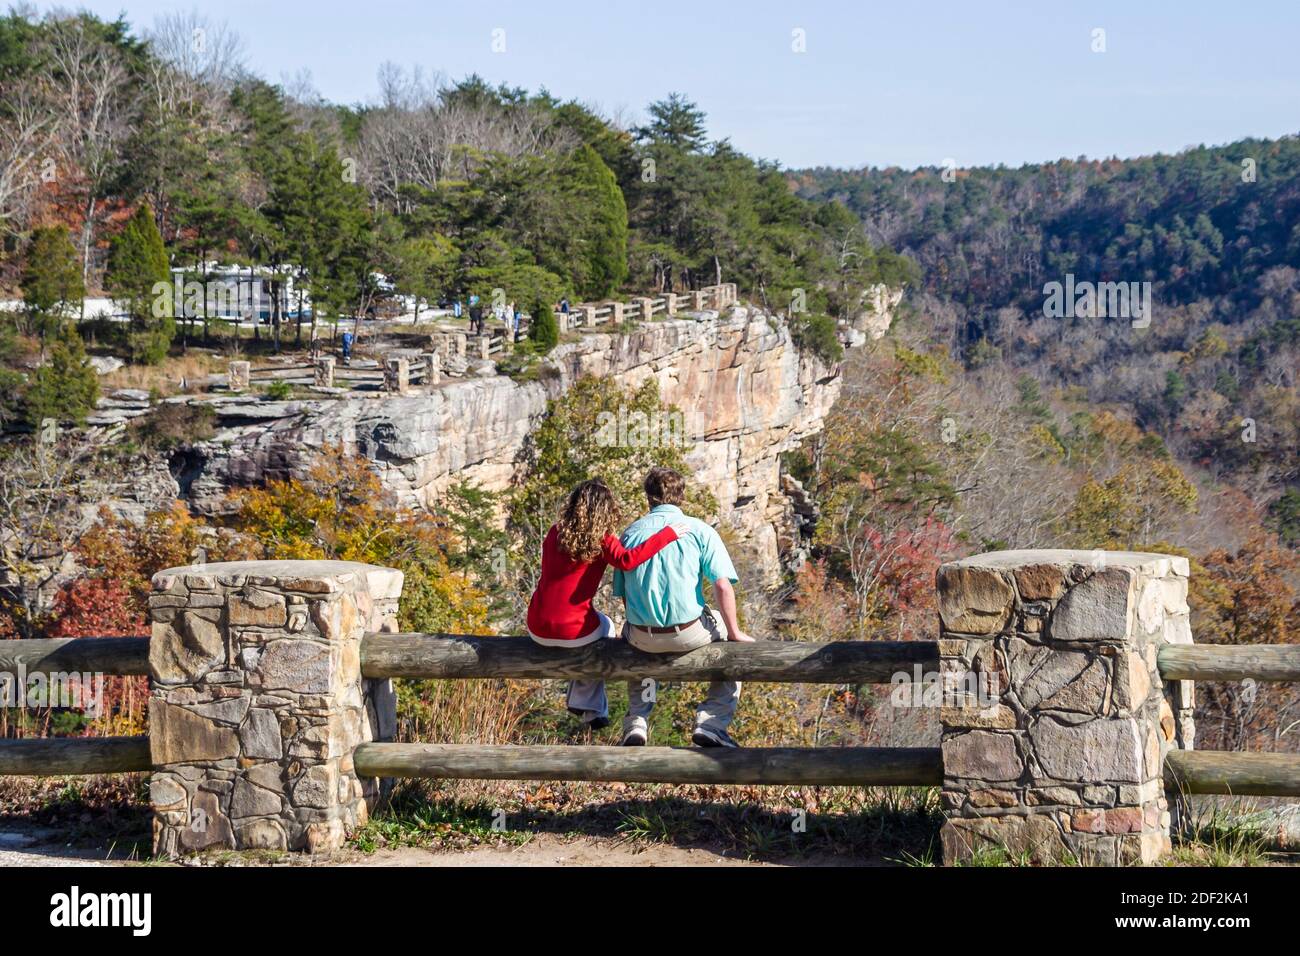 Alabama Lookout Mountain Little River Canyon National Preserve,nature natural scenery late fall,ranger uniform visiting couple man woman female overlo Stock Photo